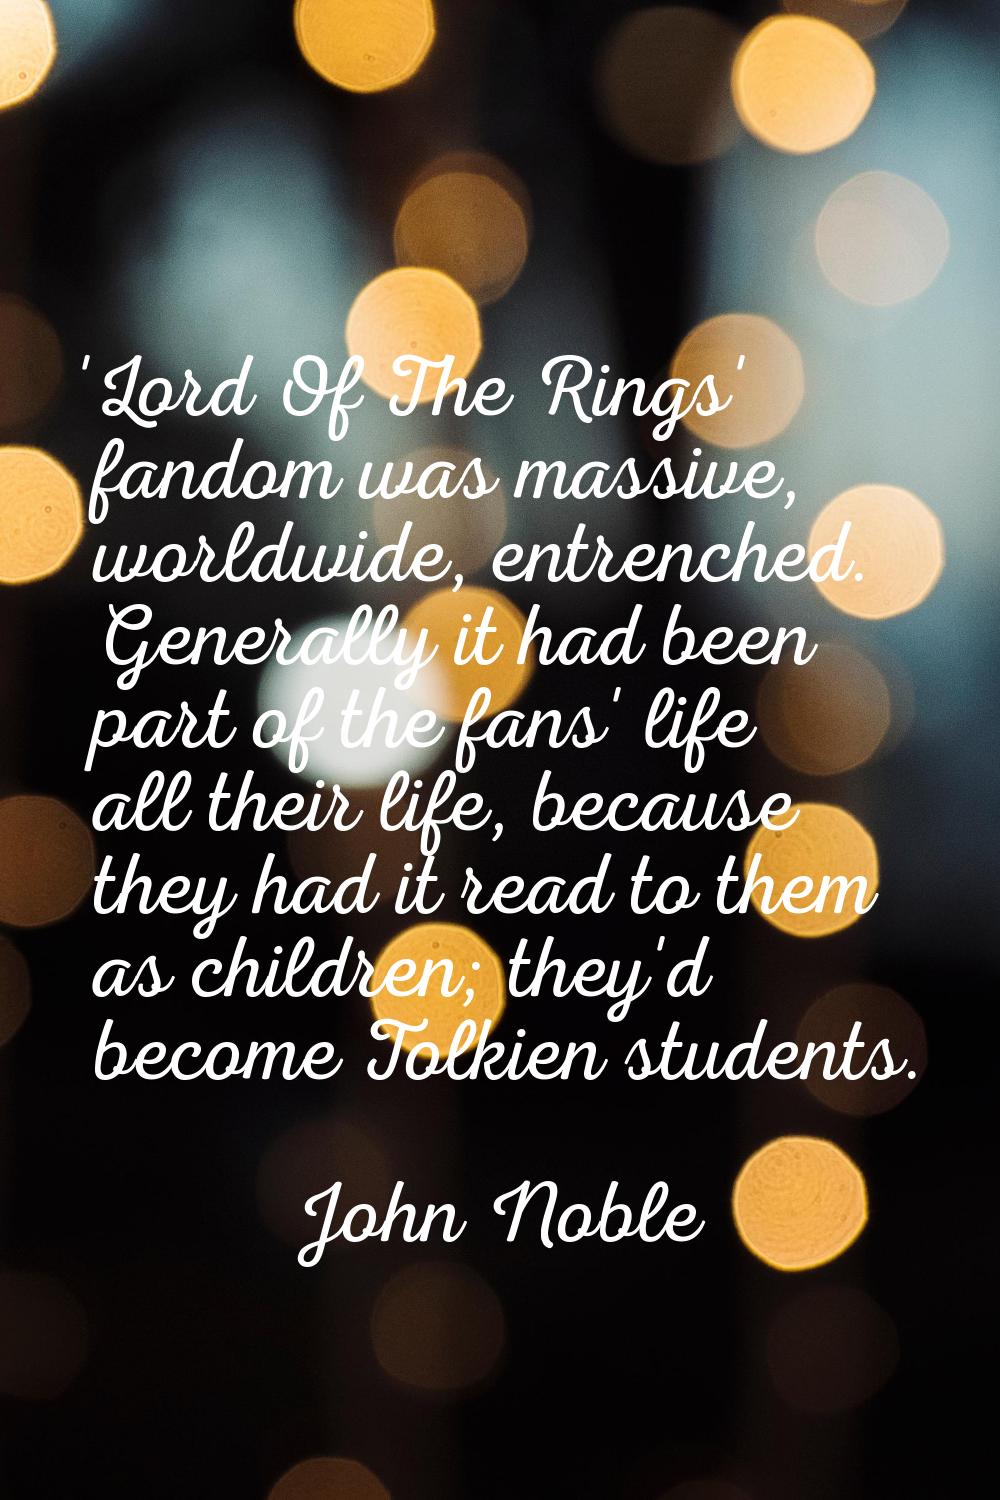 'Lord Of The Rings' fandom was massive, worldwide, entrenched. Generally it had been part of the fa